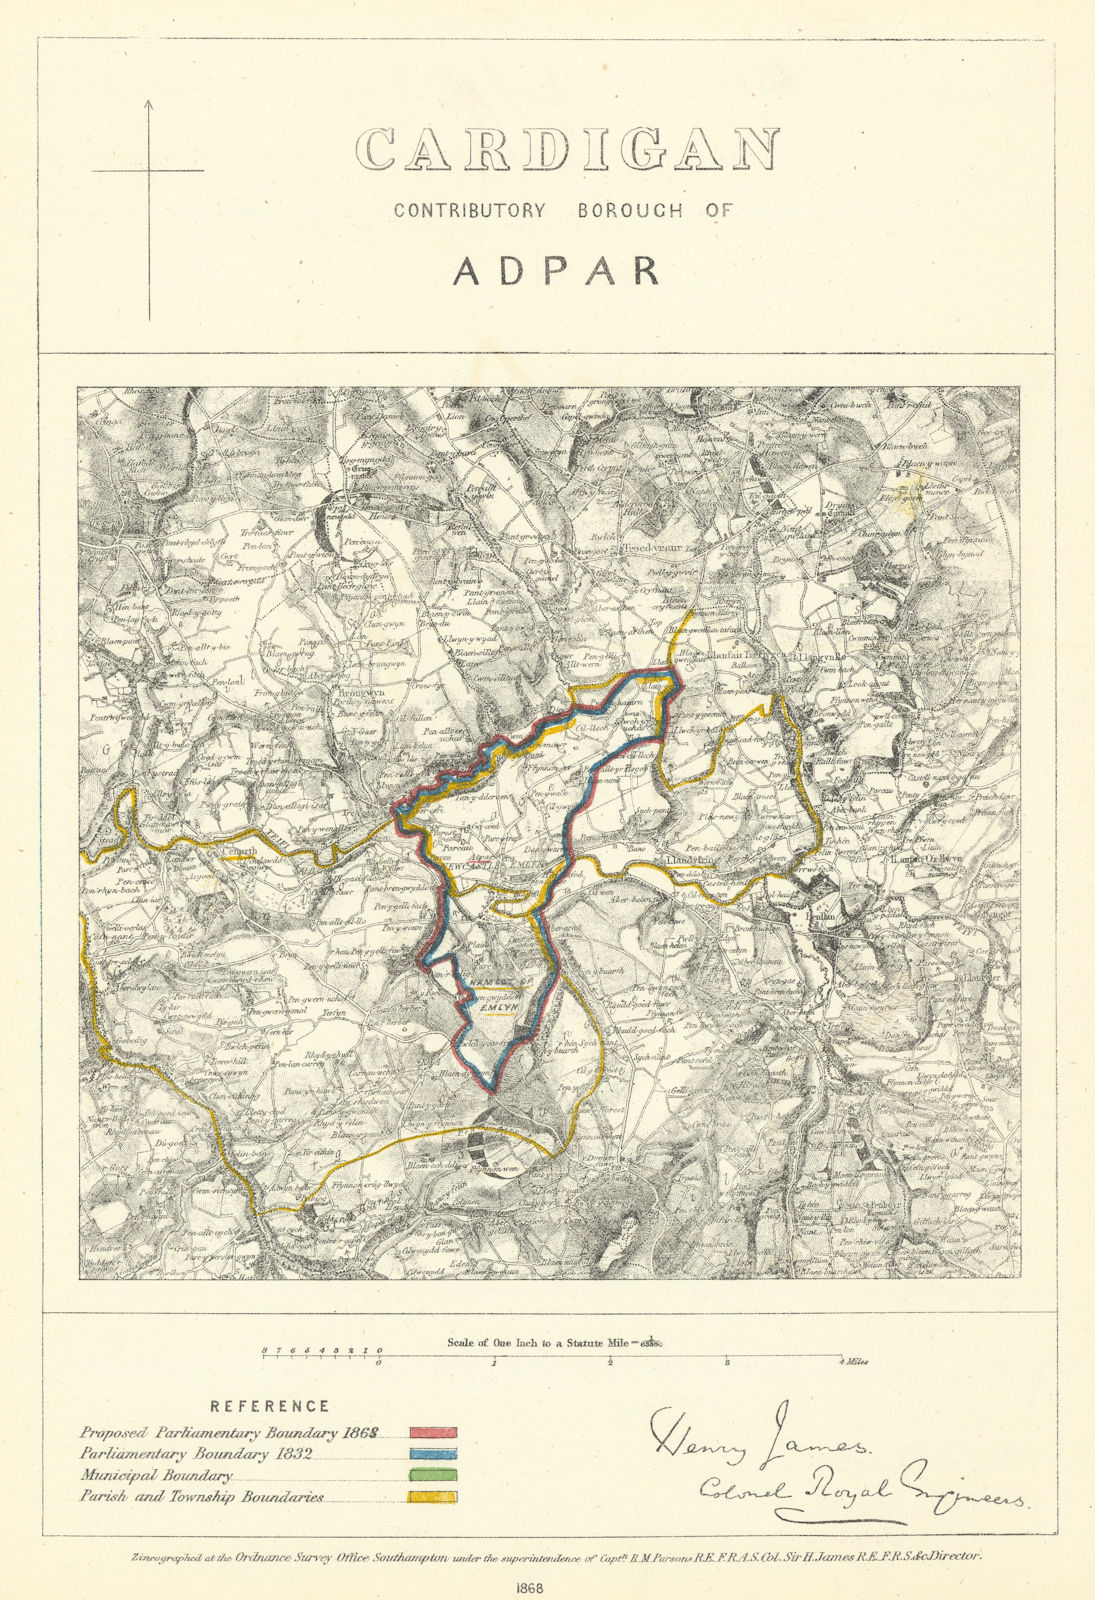 Associate Product Cardigan Contributory Borough of Adpar. JAMES. Boundary Commission 1868 map